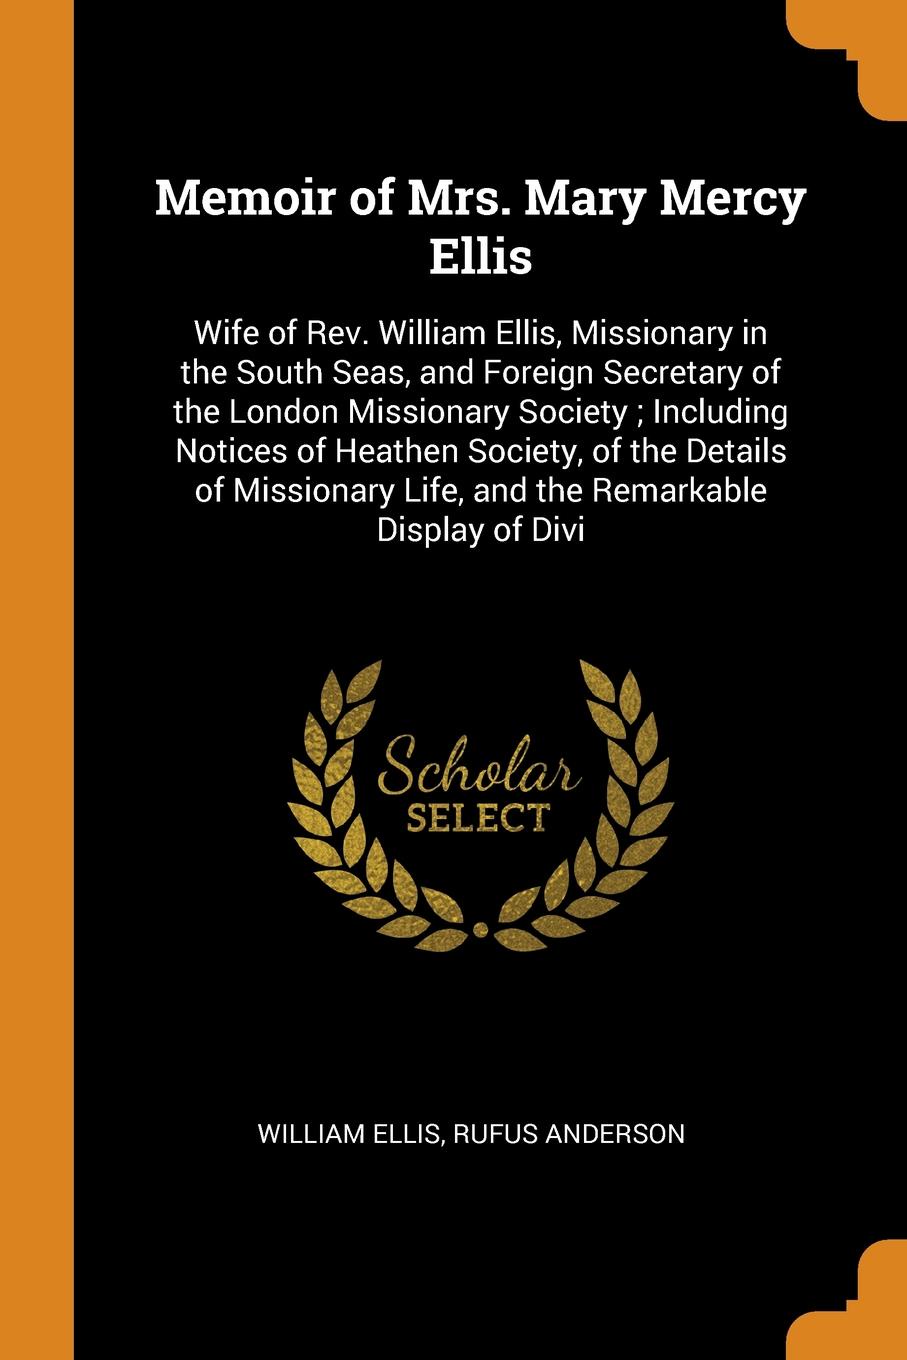 Memoir of Mrs. Mary Mercy Ellis. Wife of Rev. William Ellis, Missionary in the South Seas, and Foreign Secretary of the London Missionary Society ; Including Notices of Heathen Society, of the Details of Missionary Life, and the Remarkable Display...